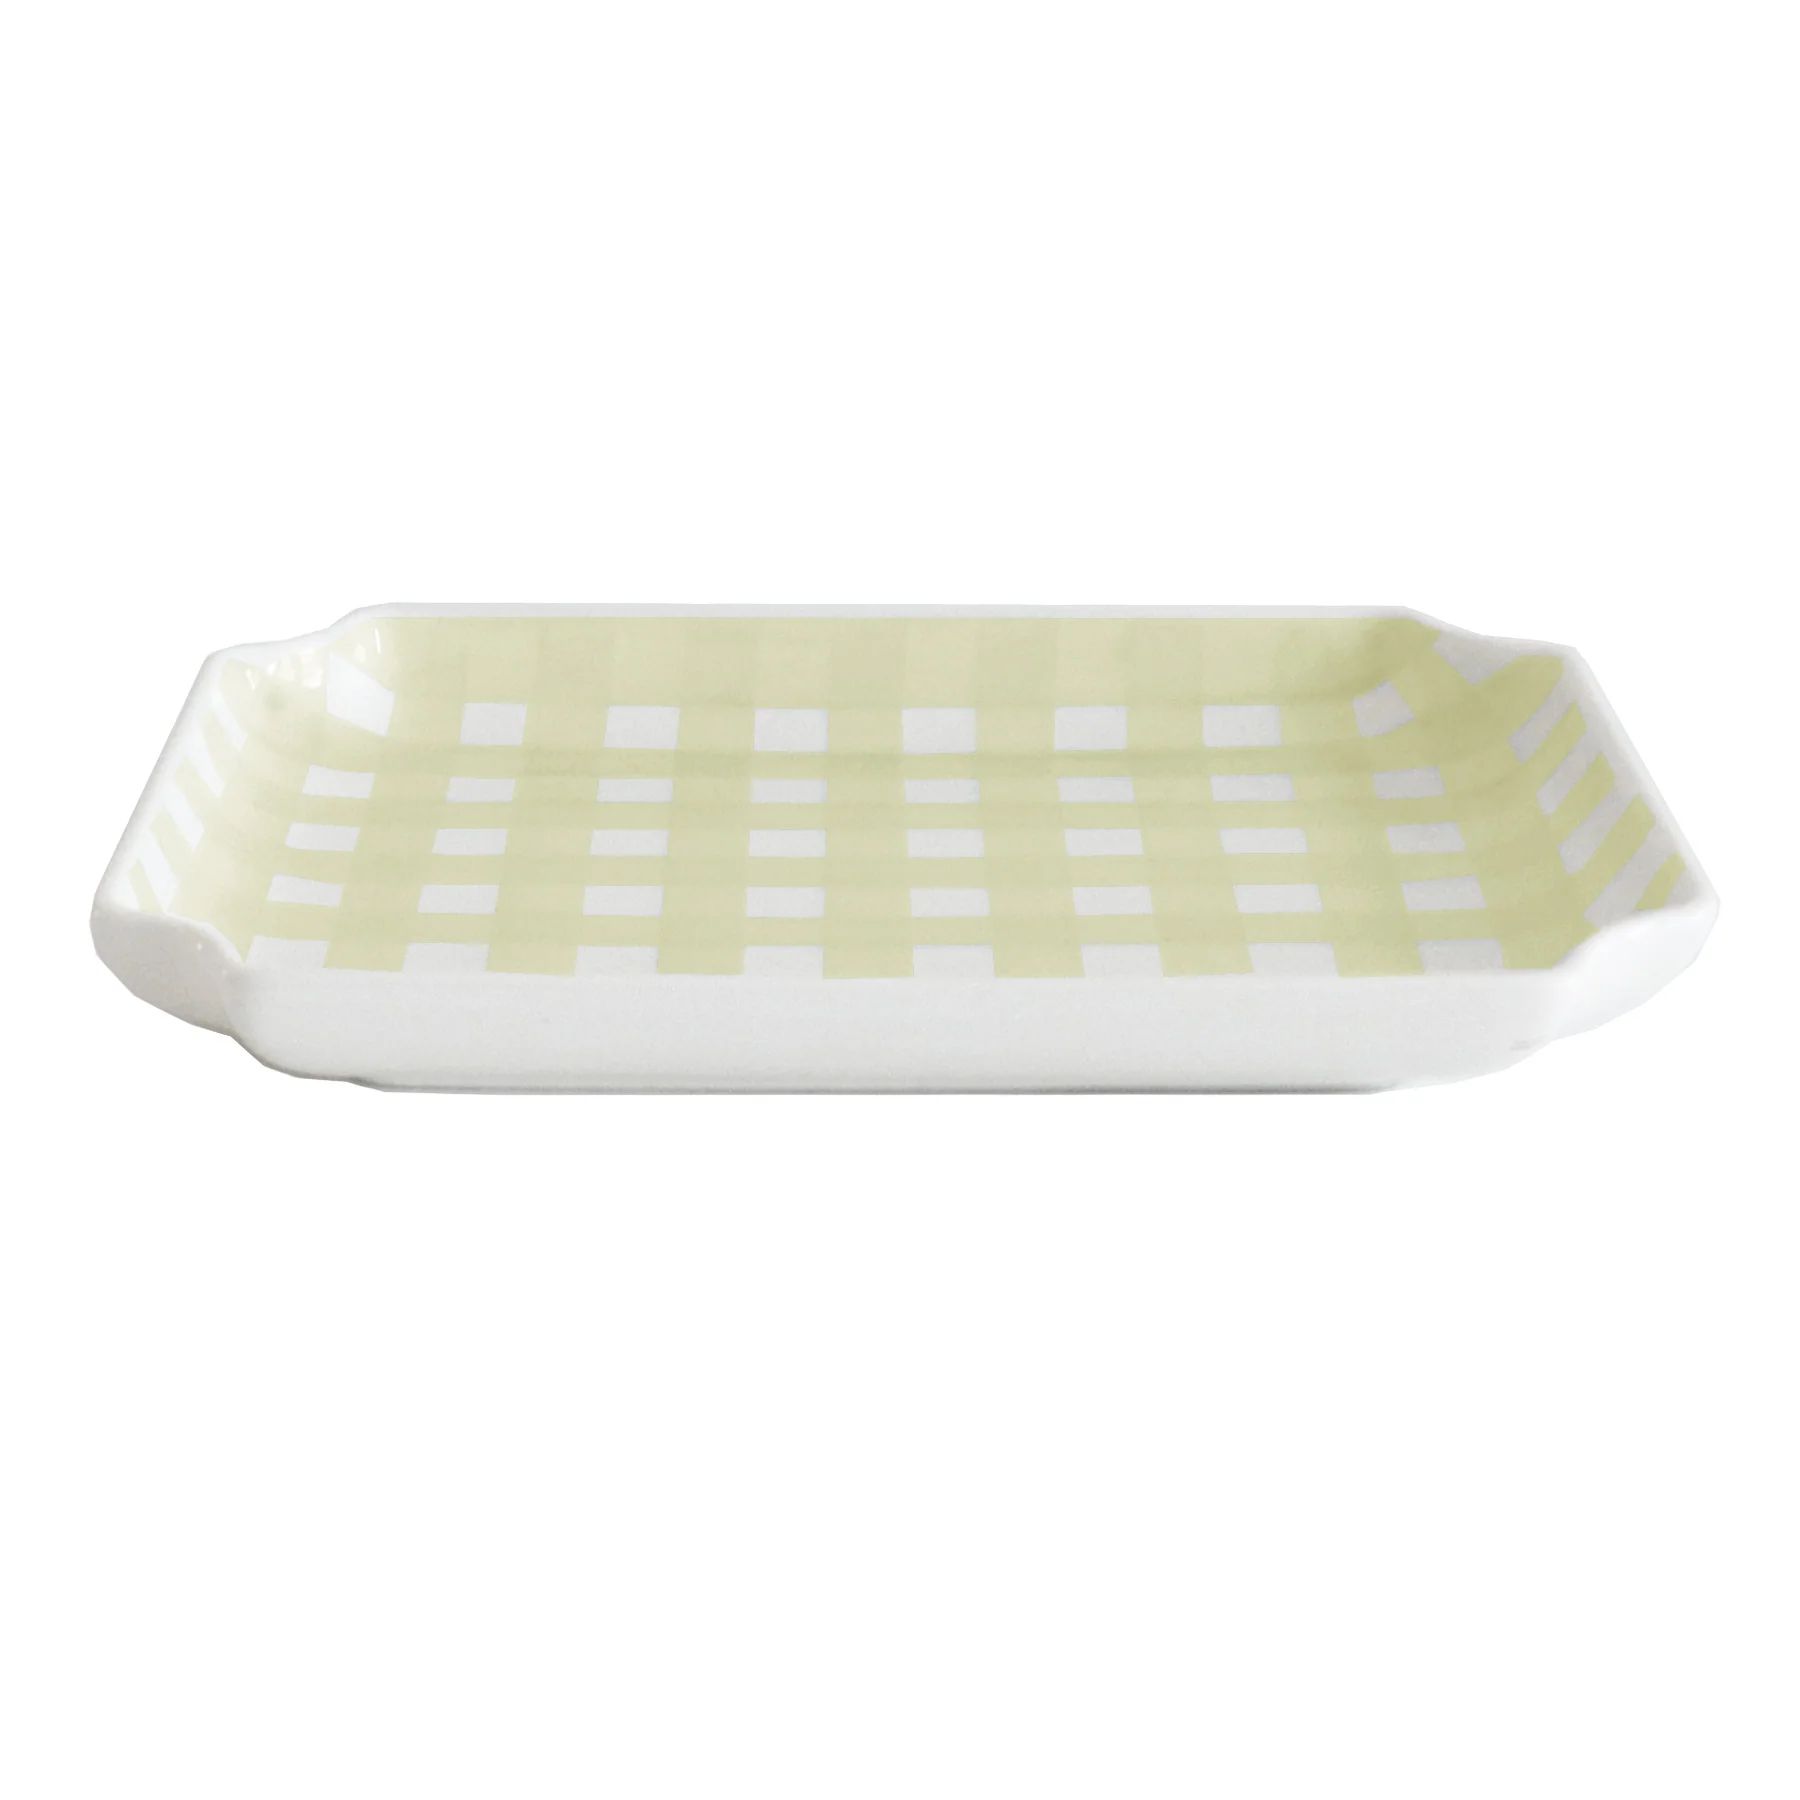 Gingham Trays | Lo Home by Lauren Haskell Designs